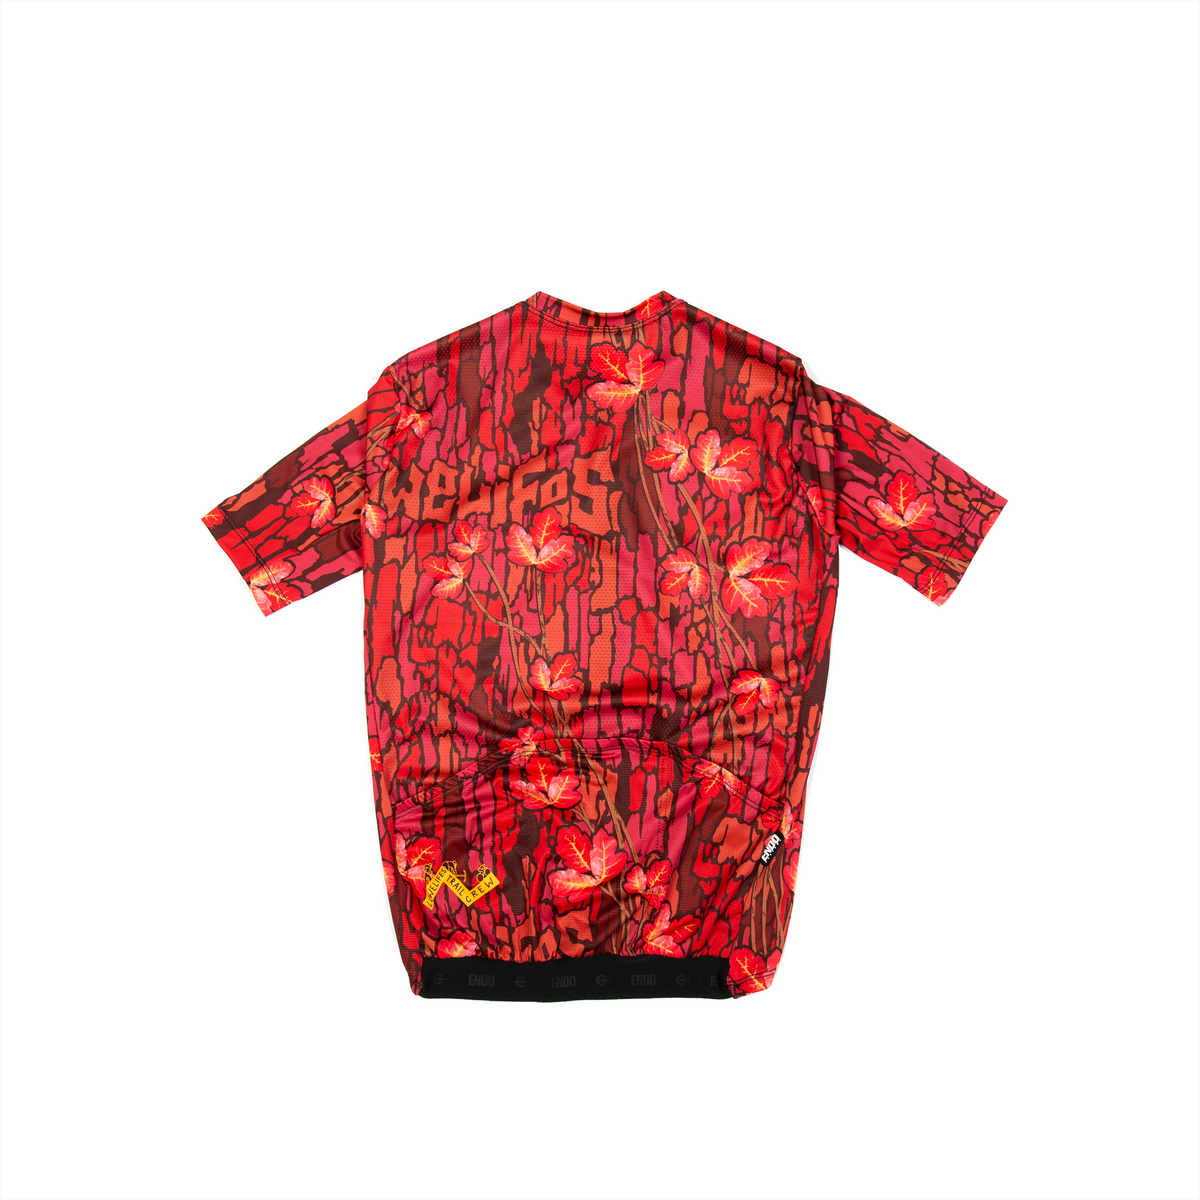 LOWELIFES - WOMEN'S LADERA JERSEY - RED